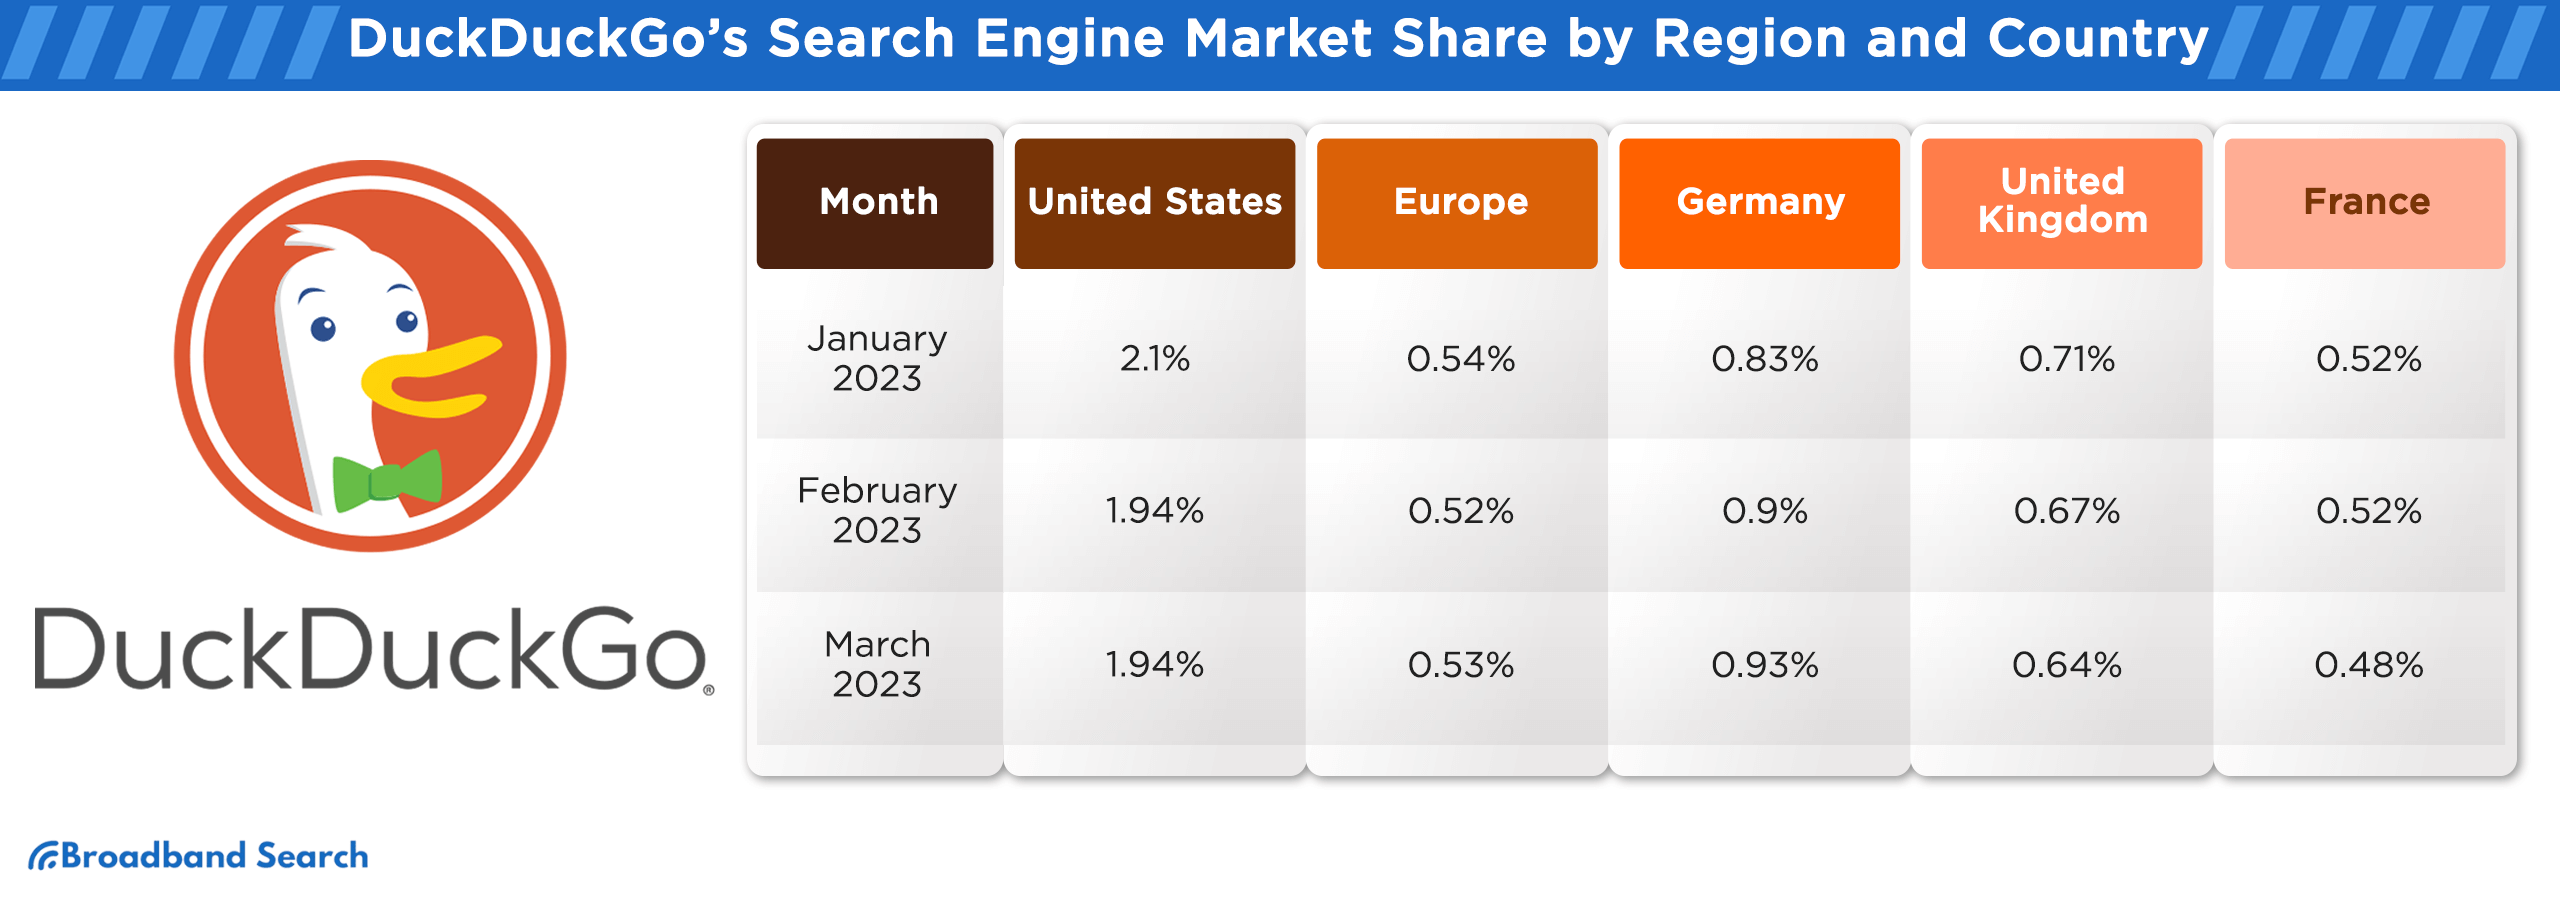 Duckduckgo's search engine market share by region and country